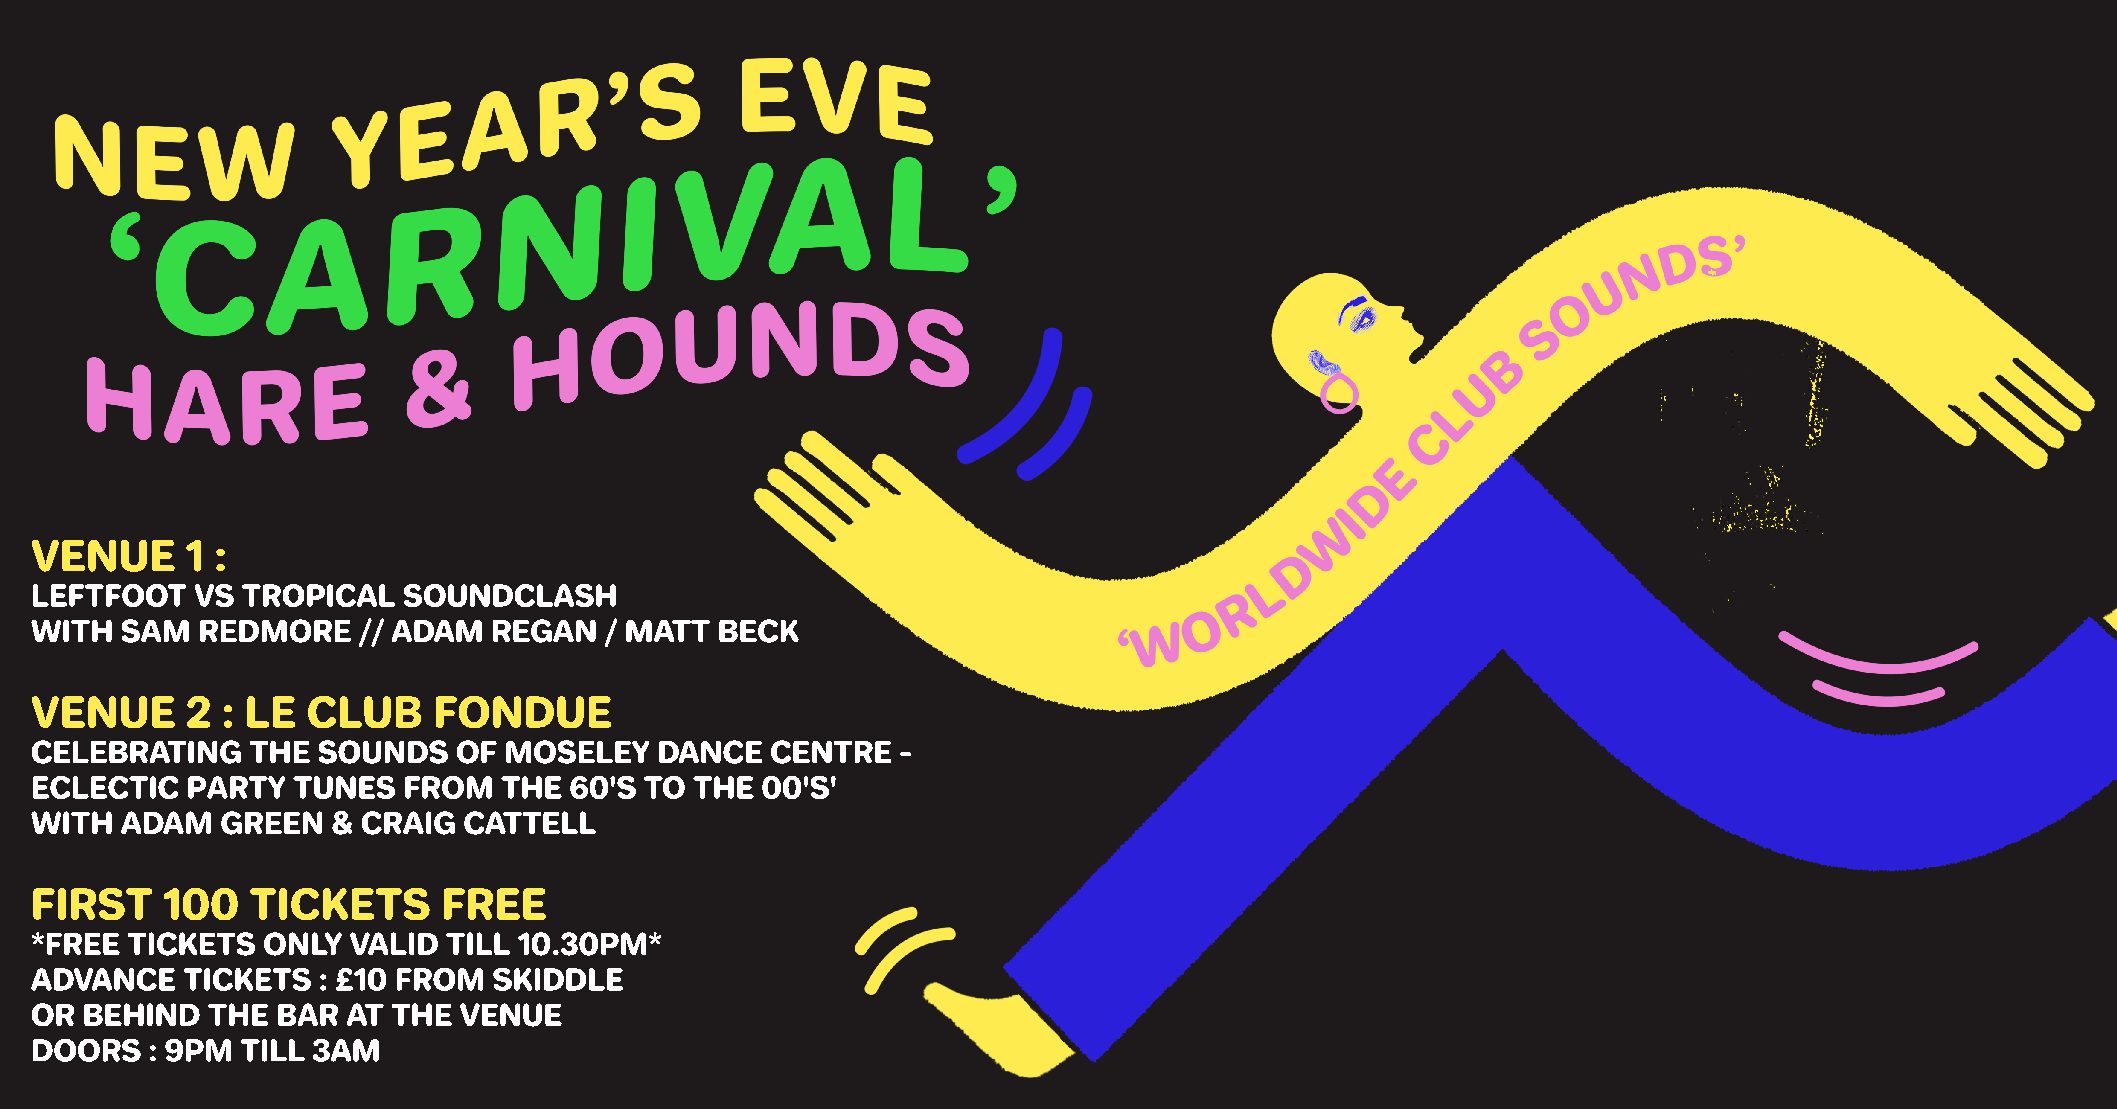 New Year’s Eve Carnival at Hare & Hounds on Monday, December 31st